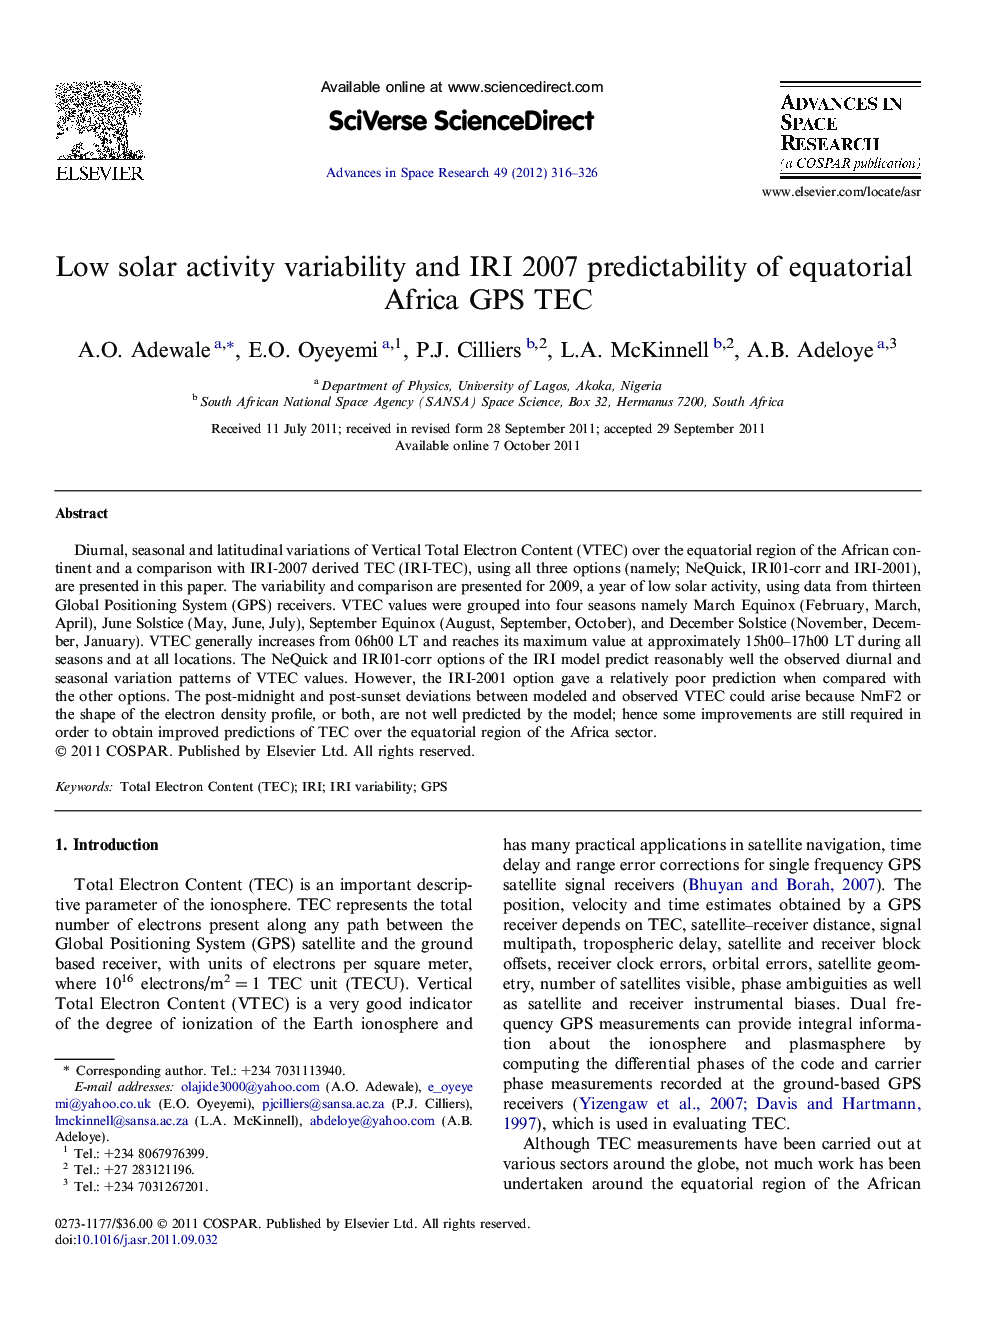 Low solar activity variability and IRI 2007 predictability of equatorial Africa GPS TEC